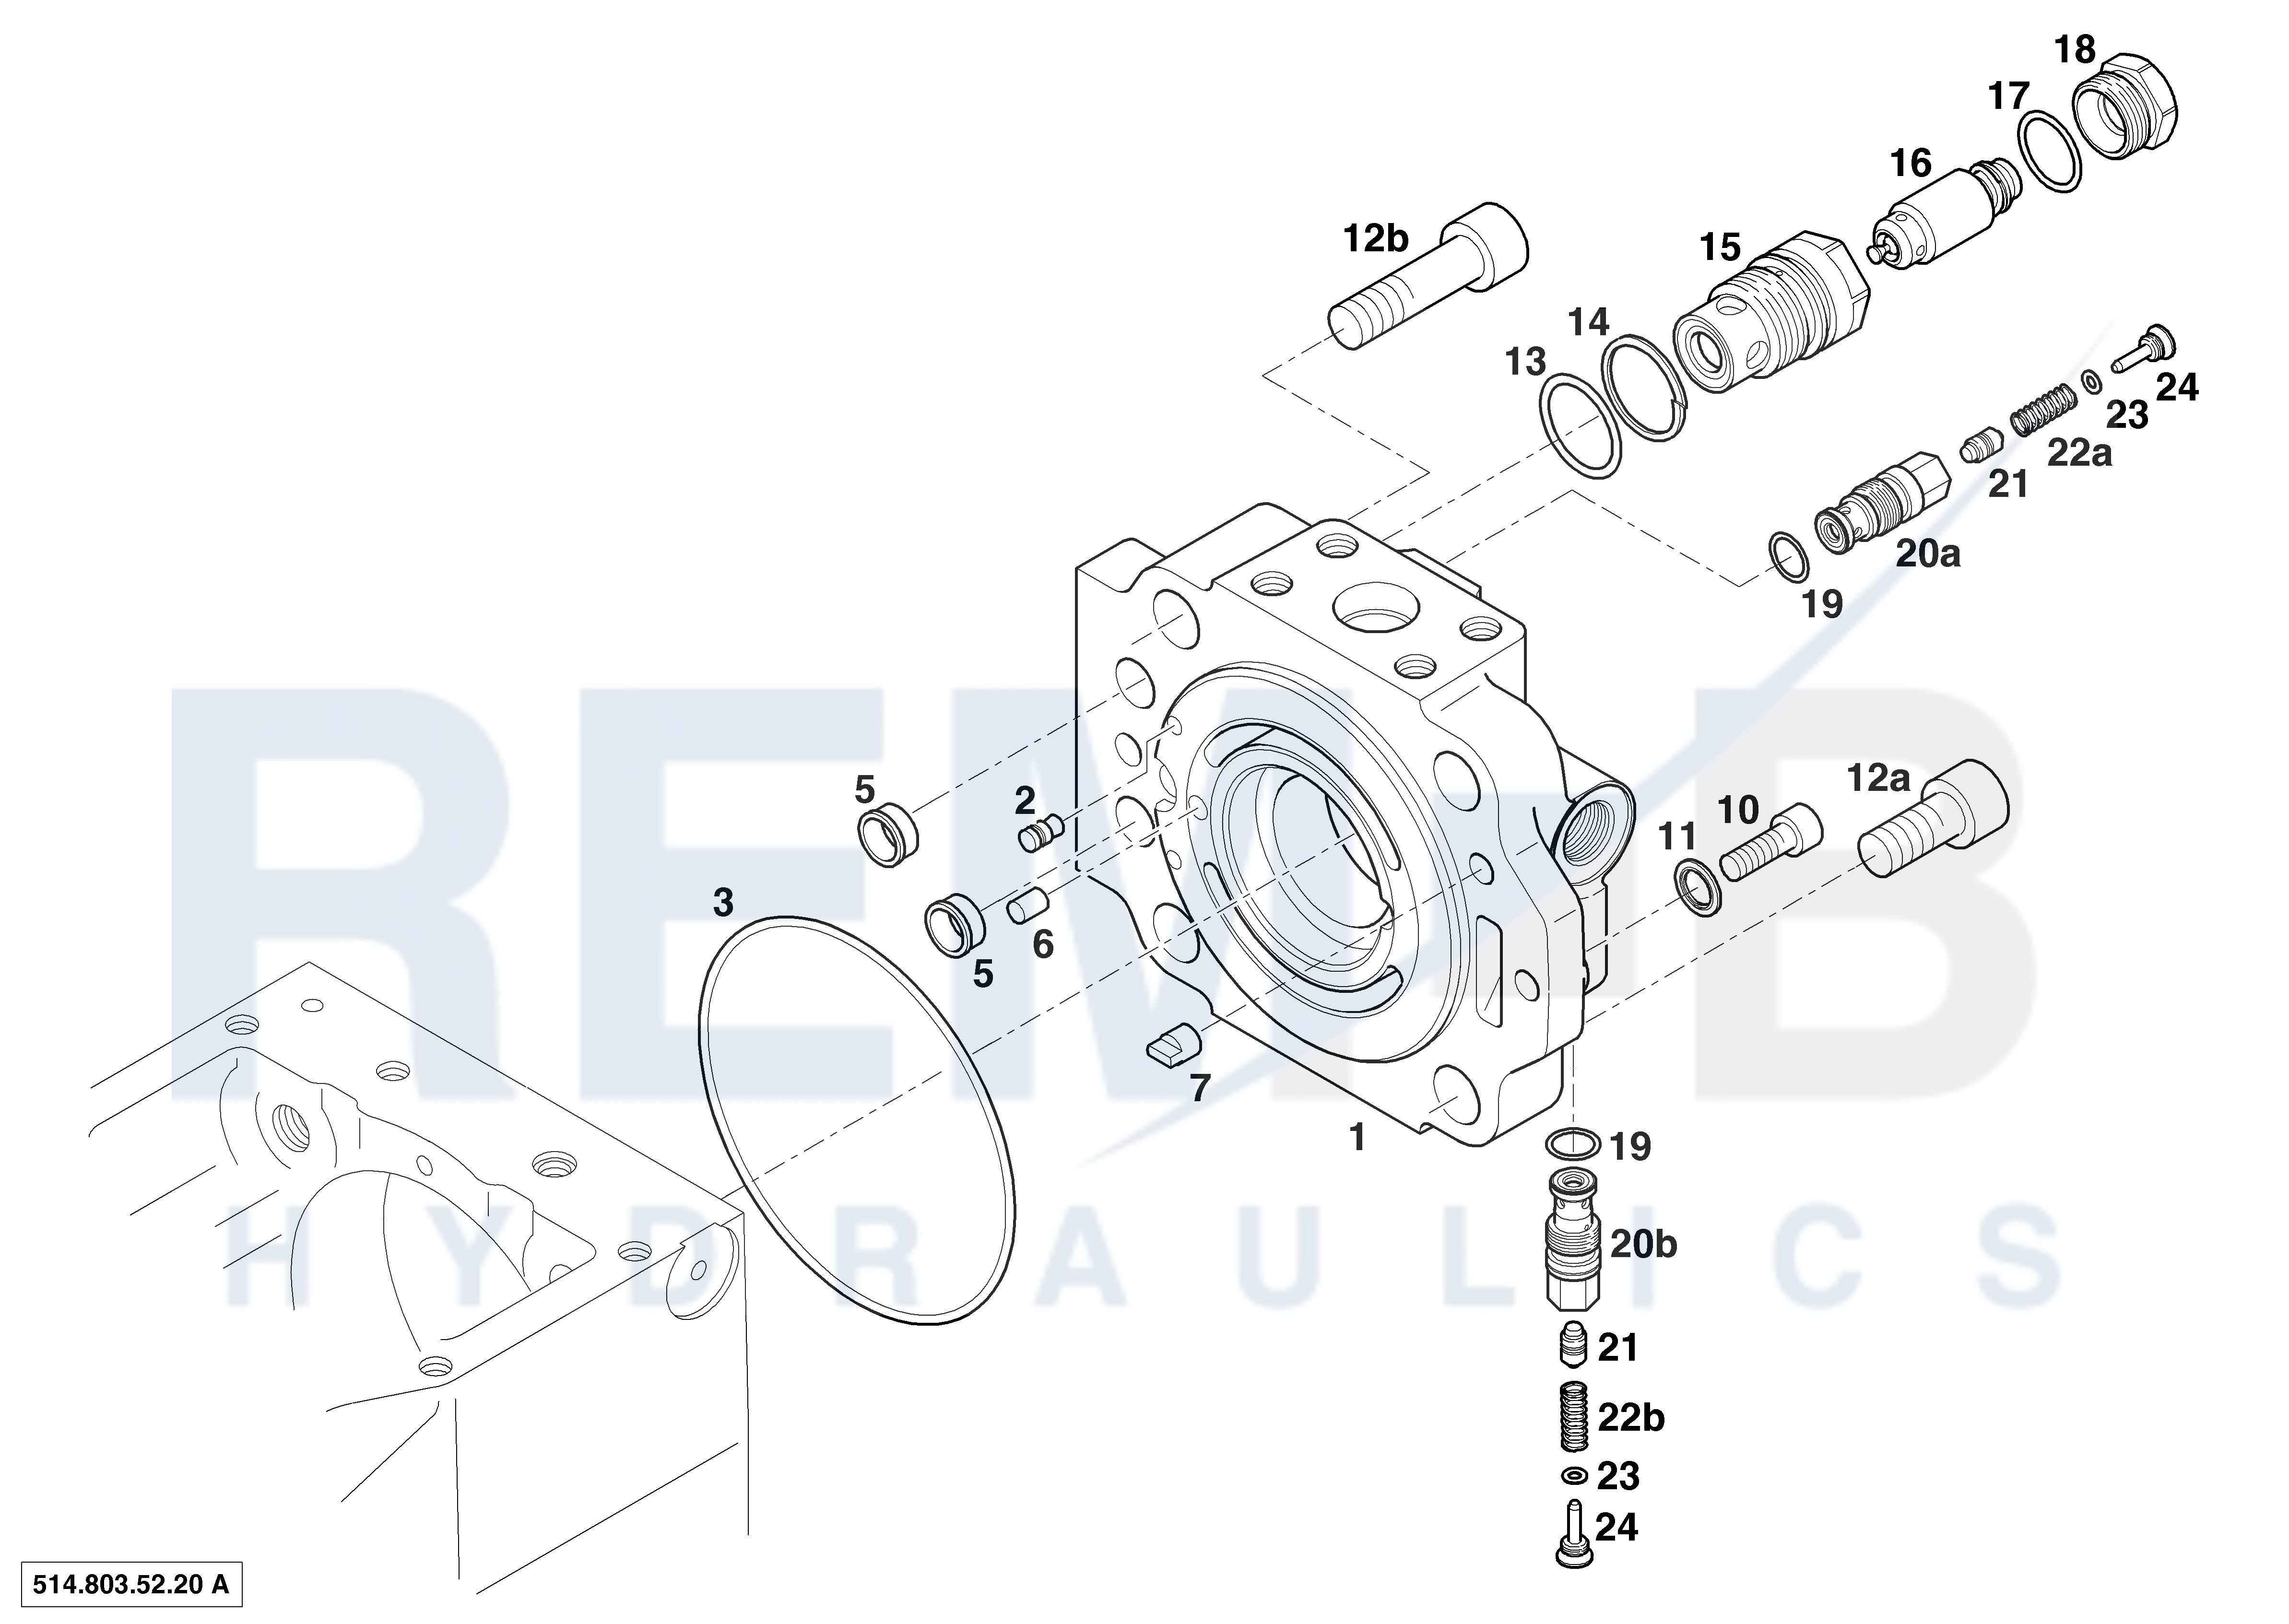 PORT PLATE HOUSING AND VALVES